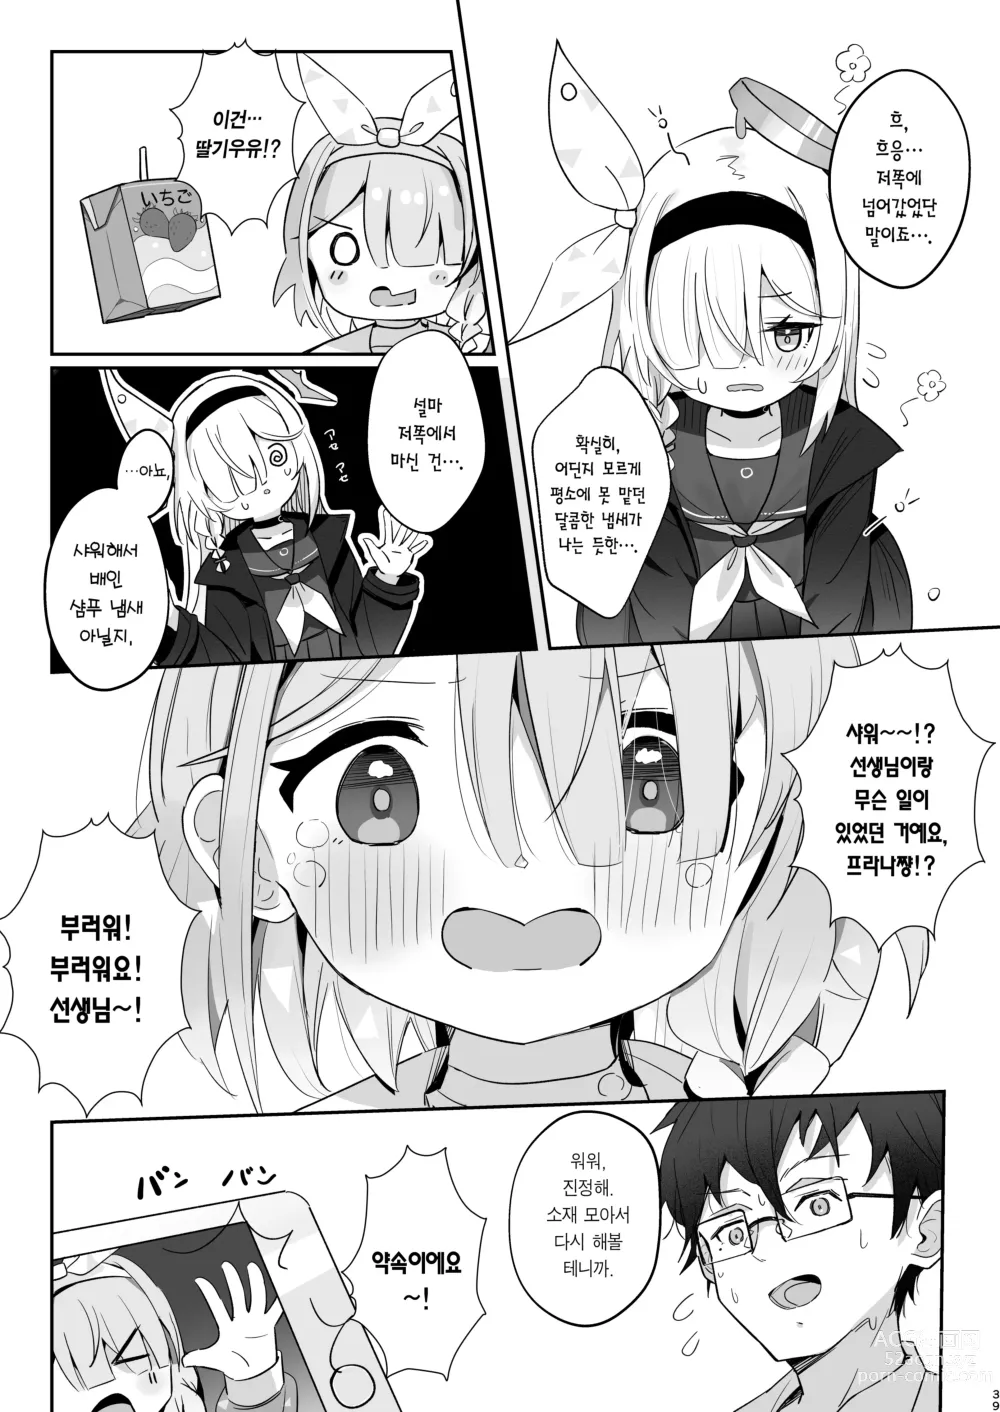 Page 38 of doujinshi 이 따스함을 알아버렸어